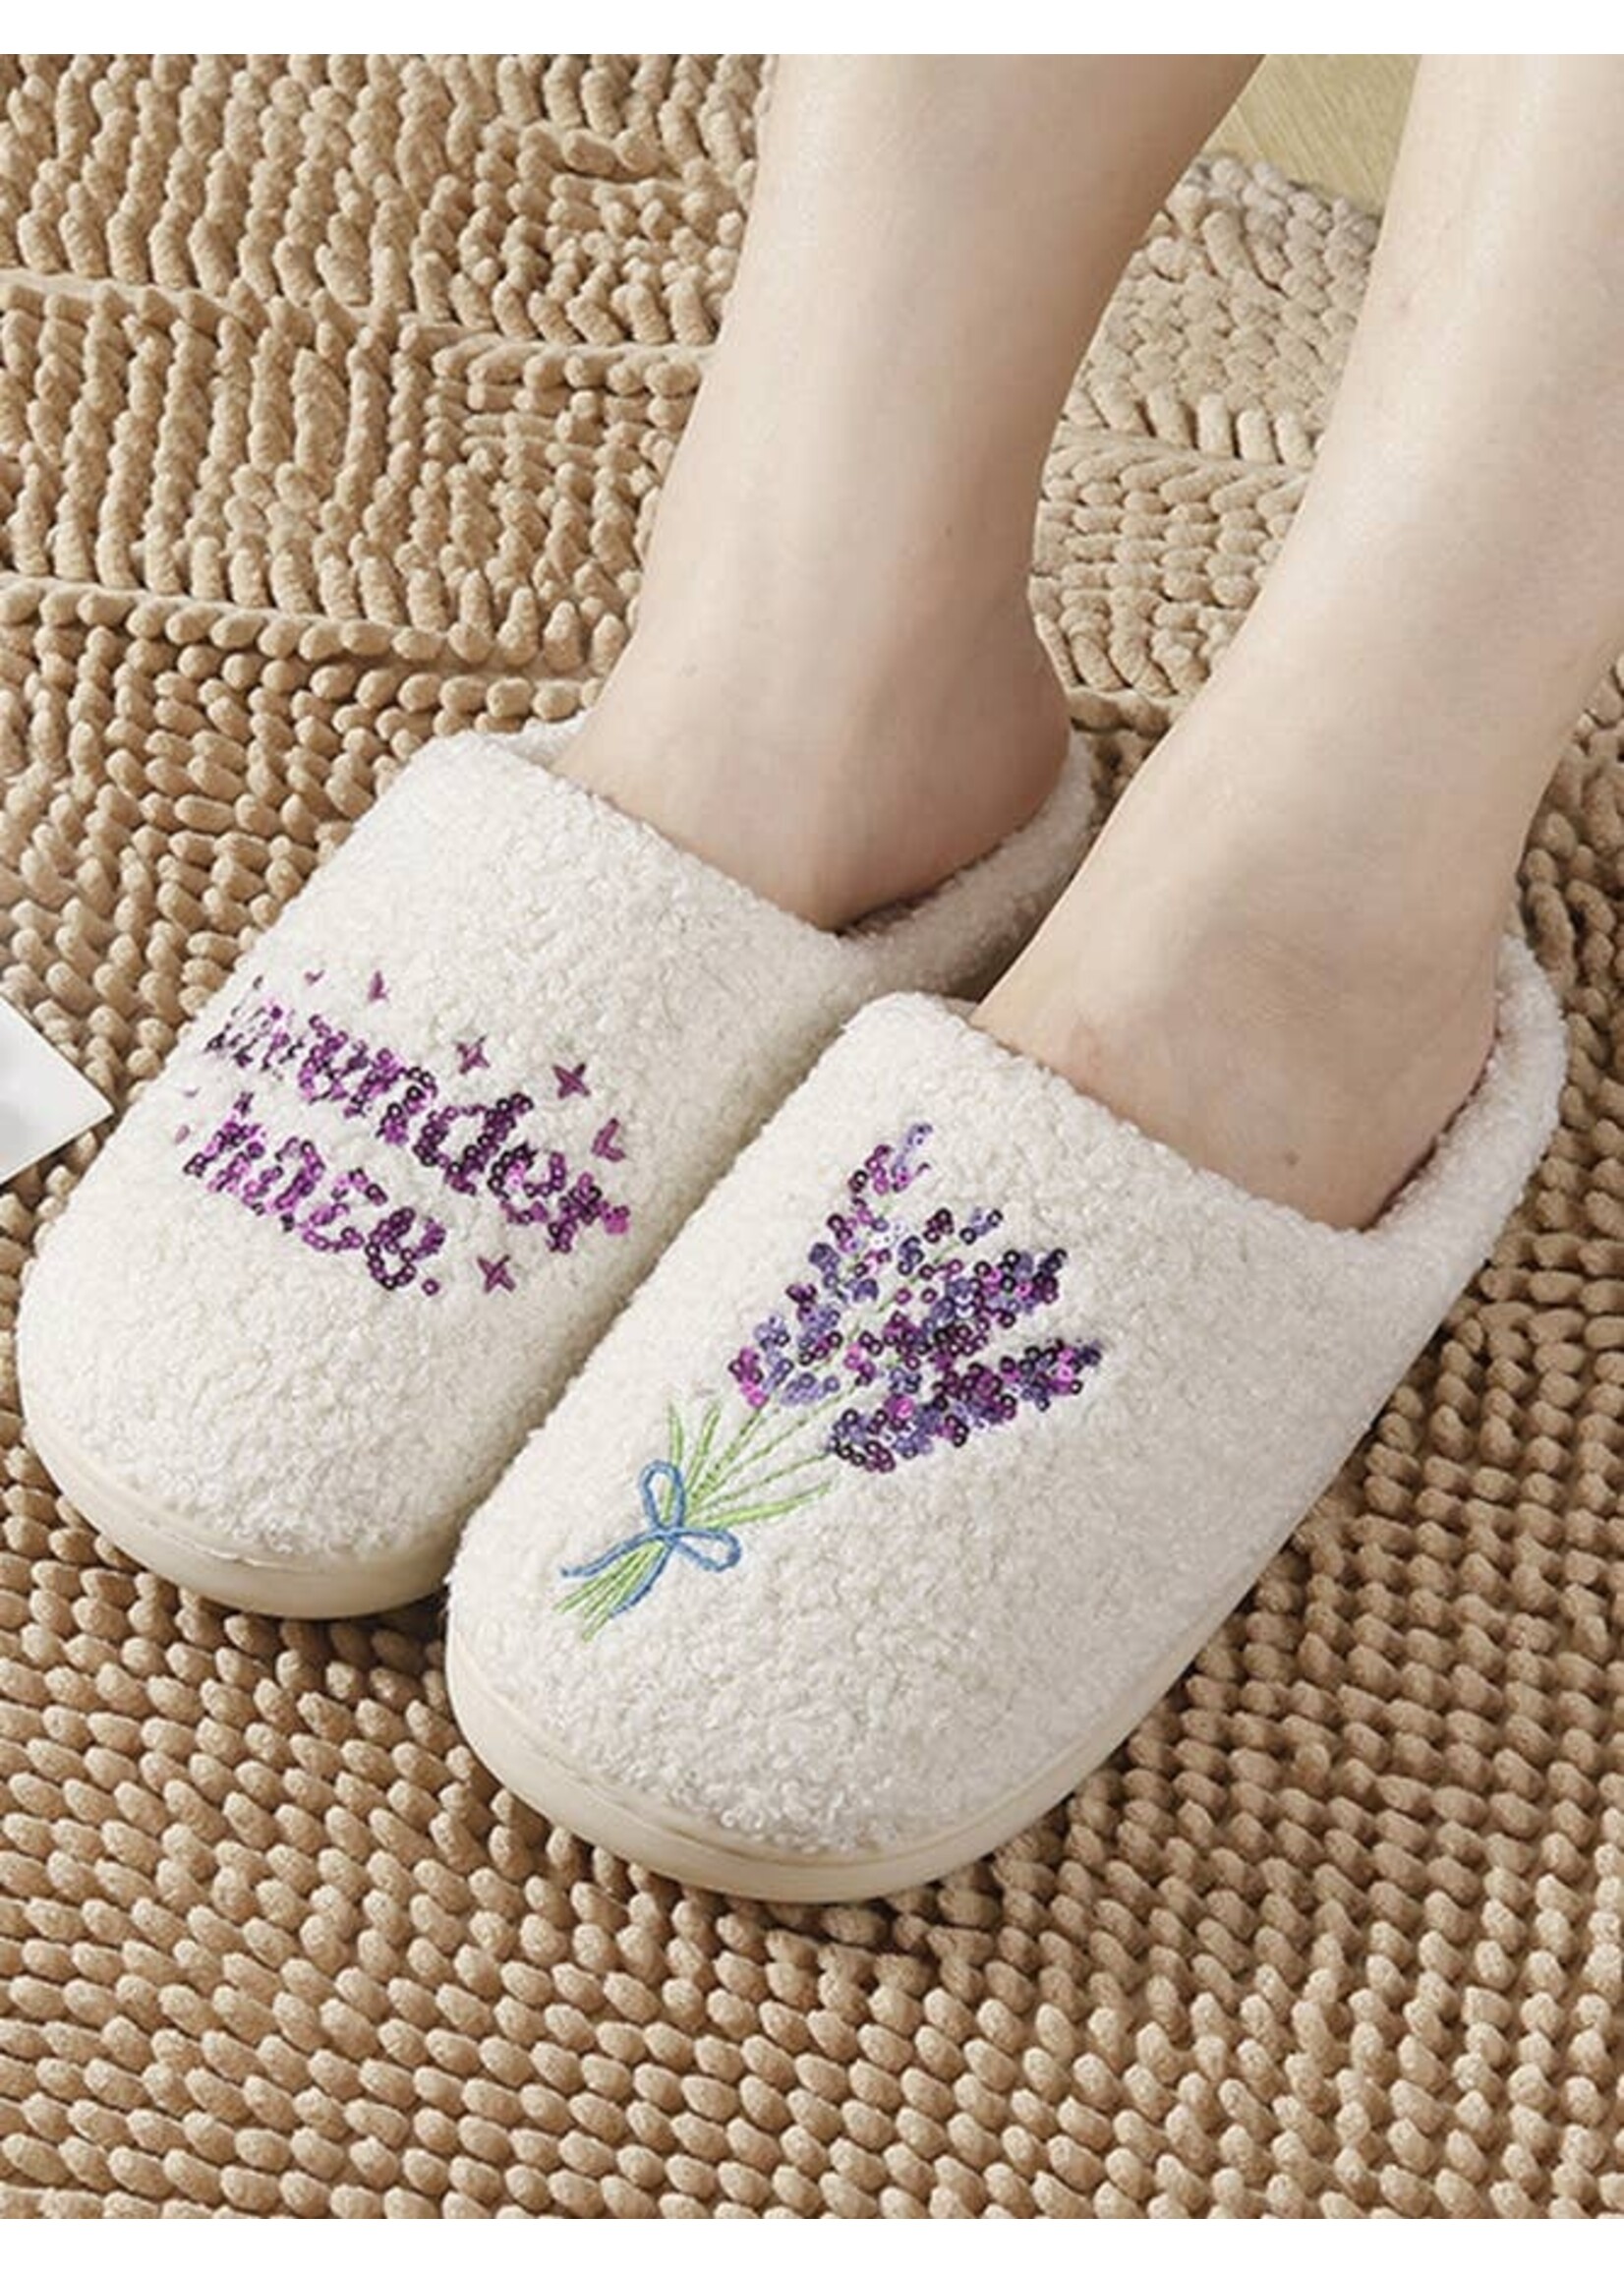 Taylor's Version Fleece Slippers Taylor Swiftie - For The Love of Shoes NY